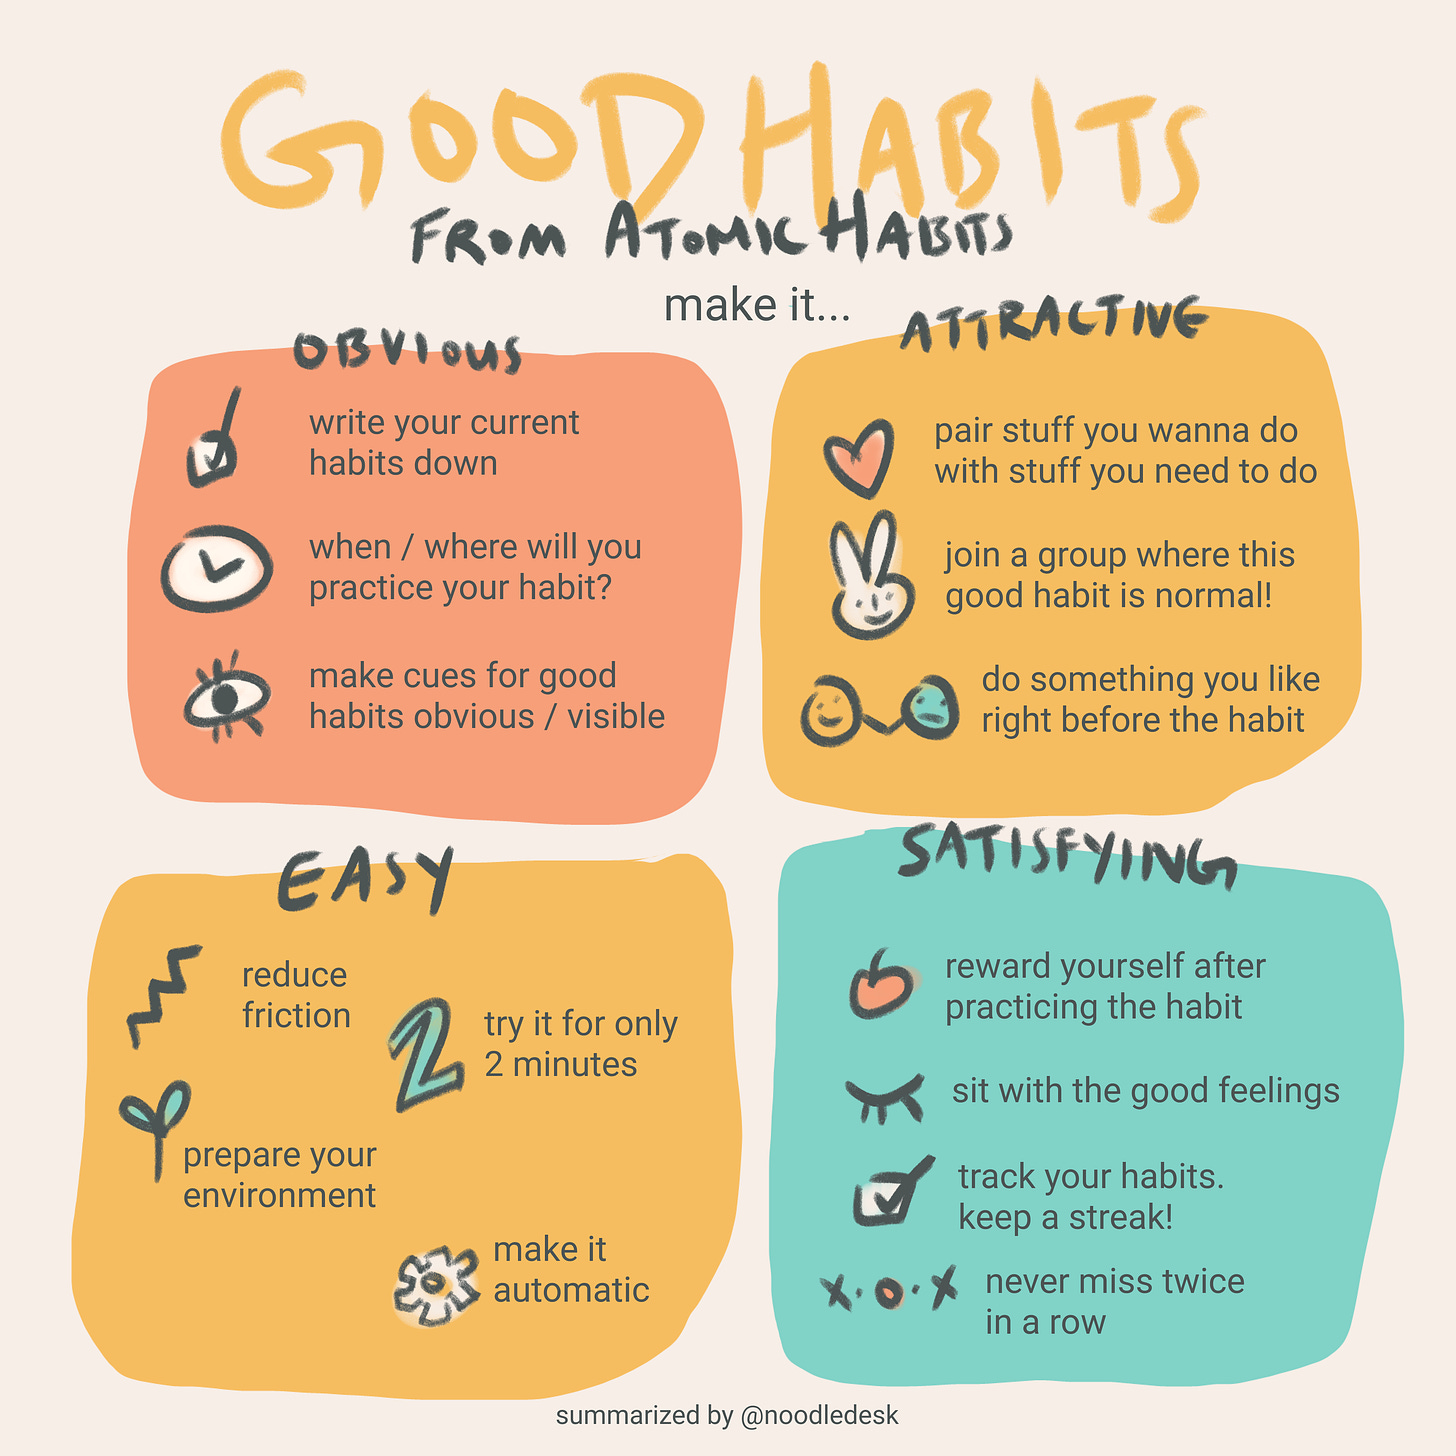 a visual summary of atomic habits, which is summarized in his how to make a good habit section